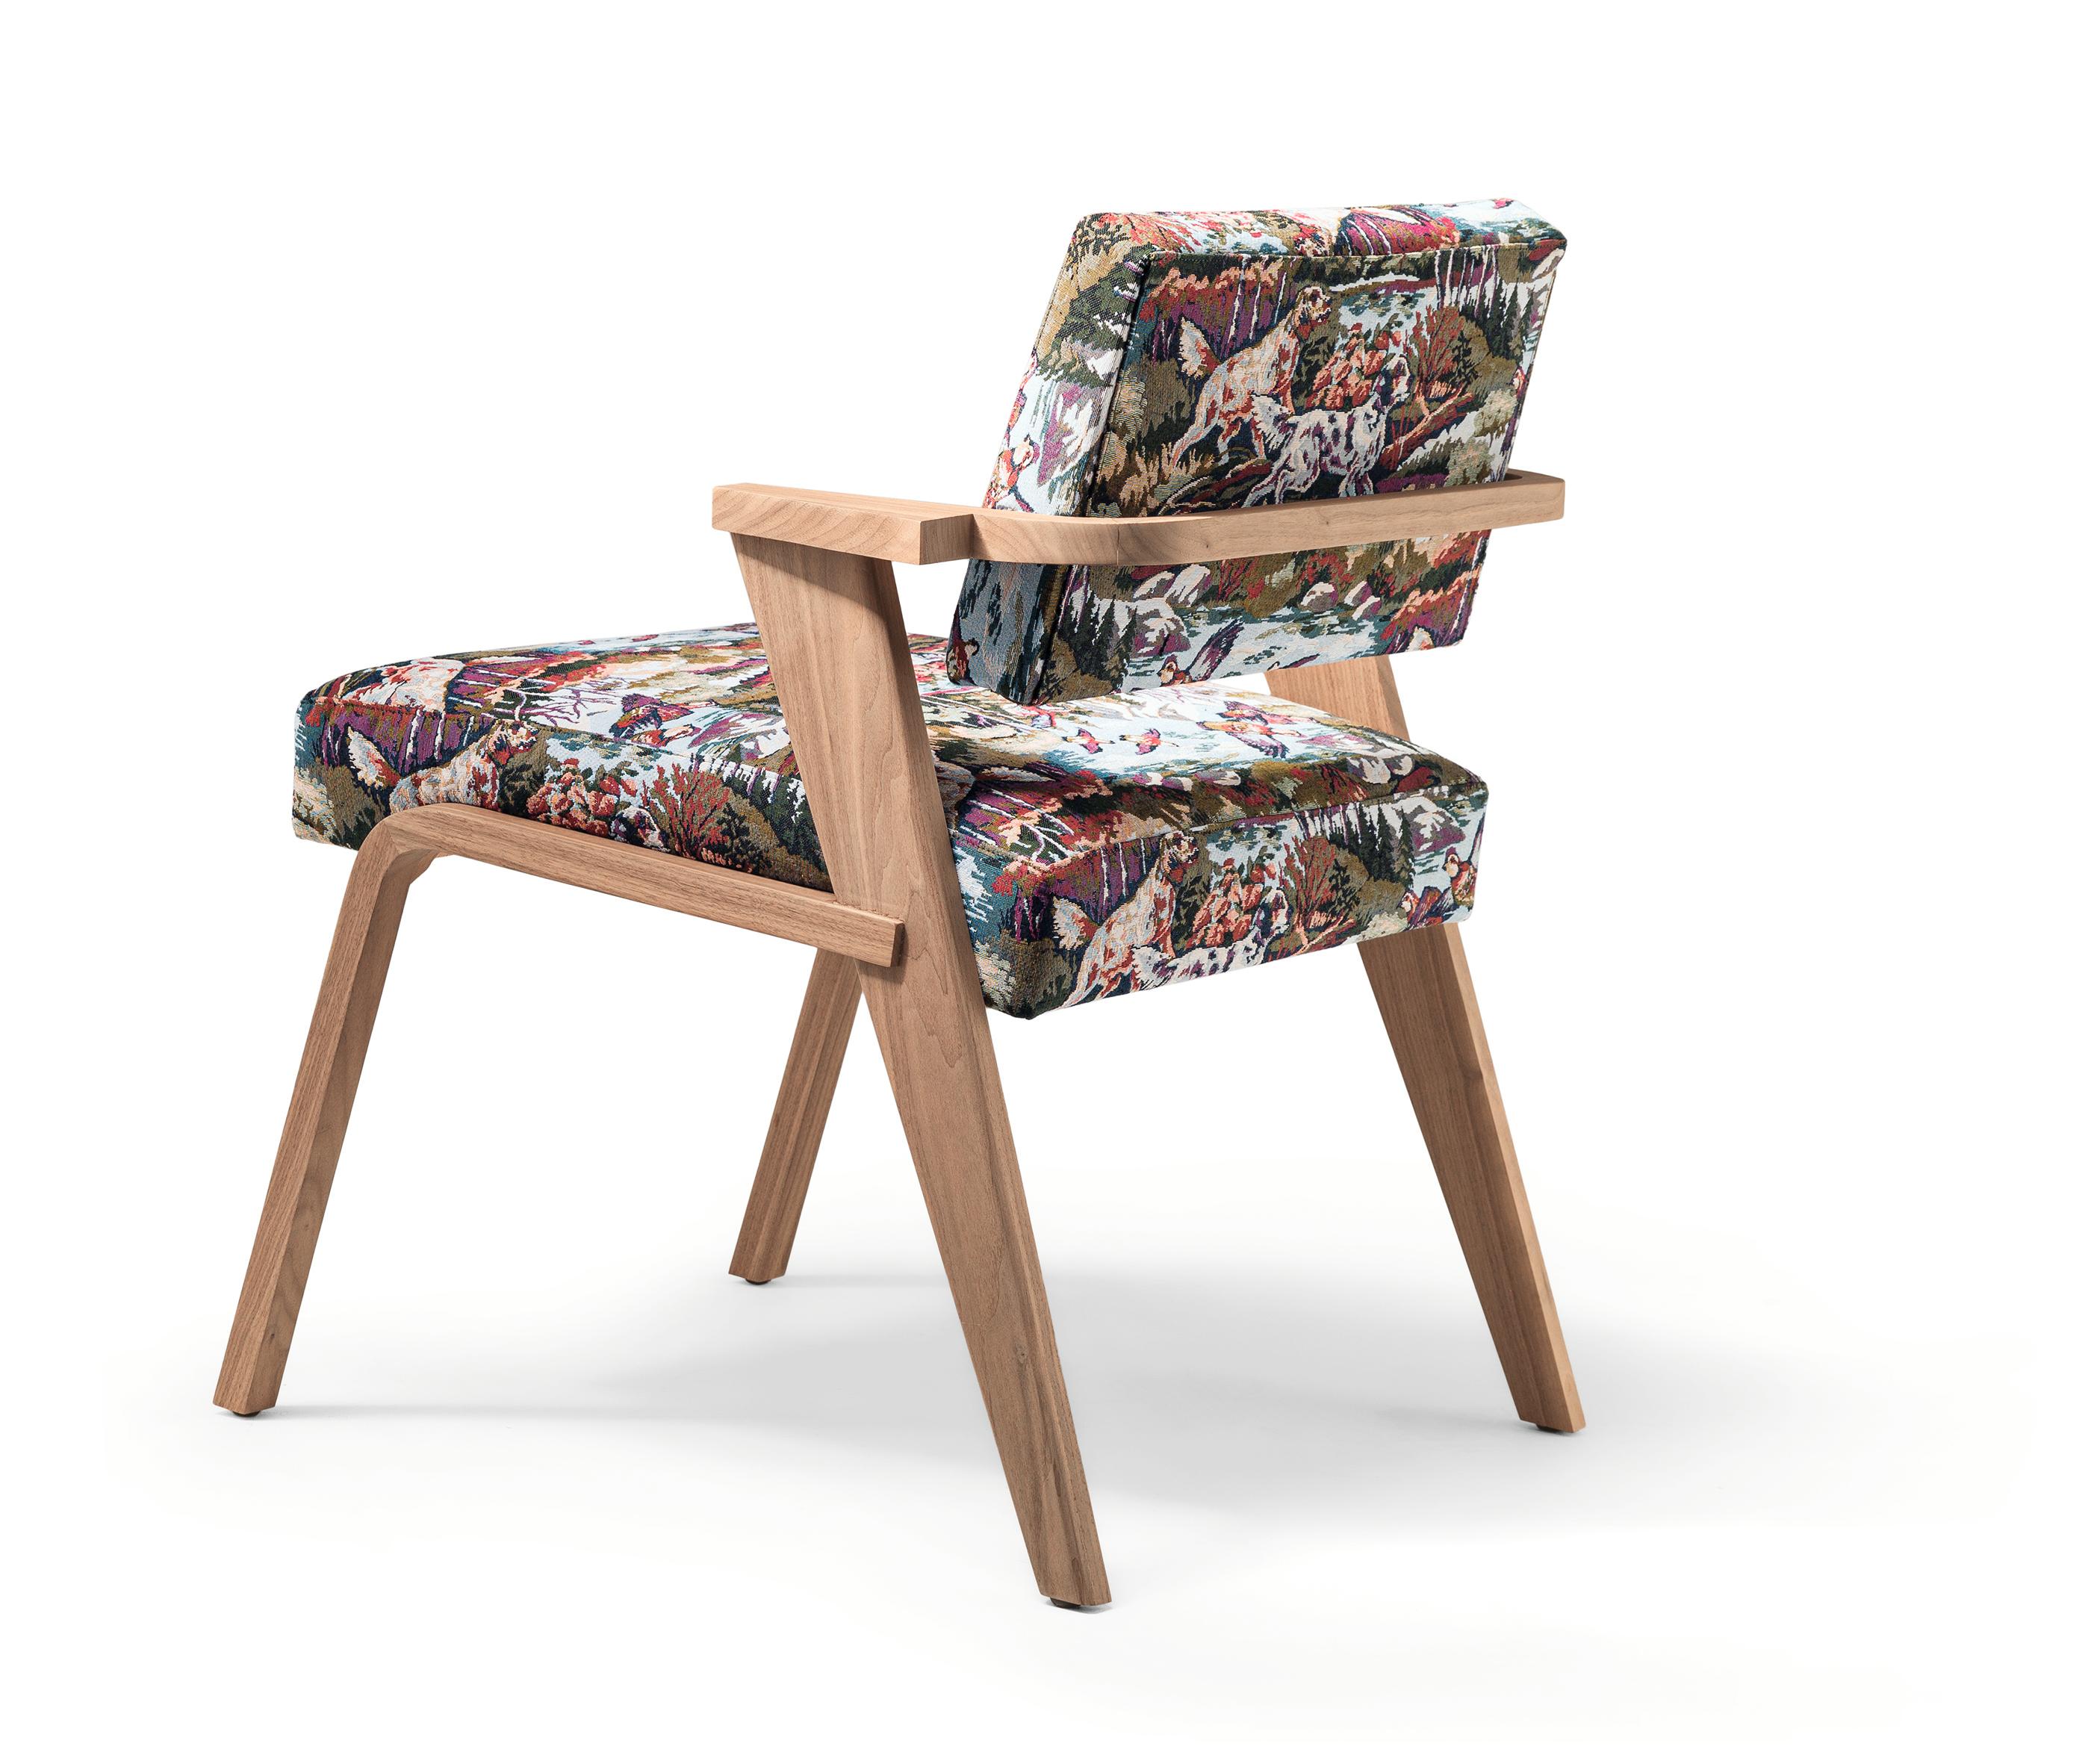 NOCINA/D is a dining armchair completely made from solid Canaletto walnut wood, then finished in matt natural (2% gloss). The seat and the backrest are covered with a fabric depicting a hunting scene.